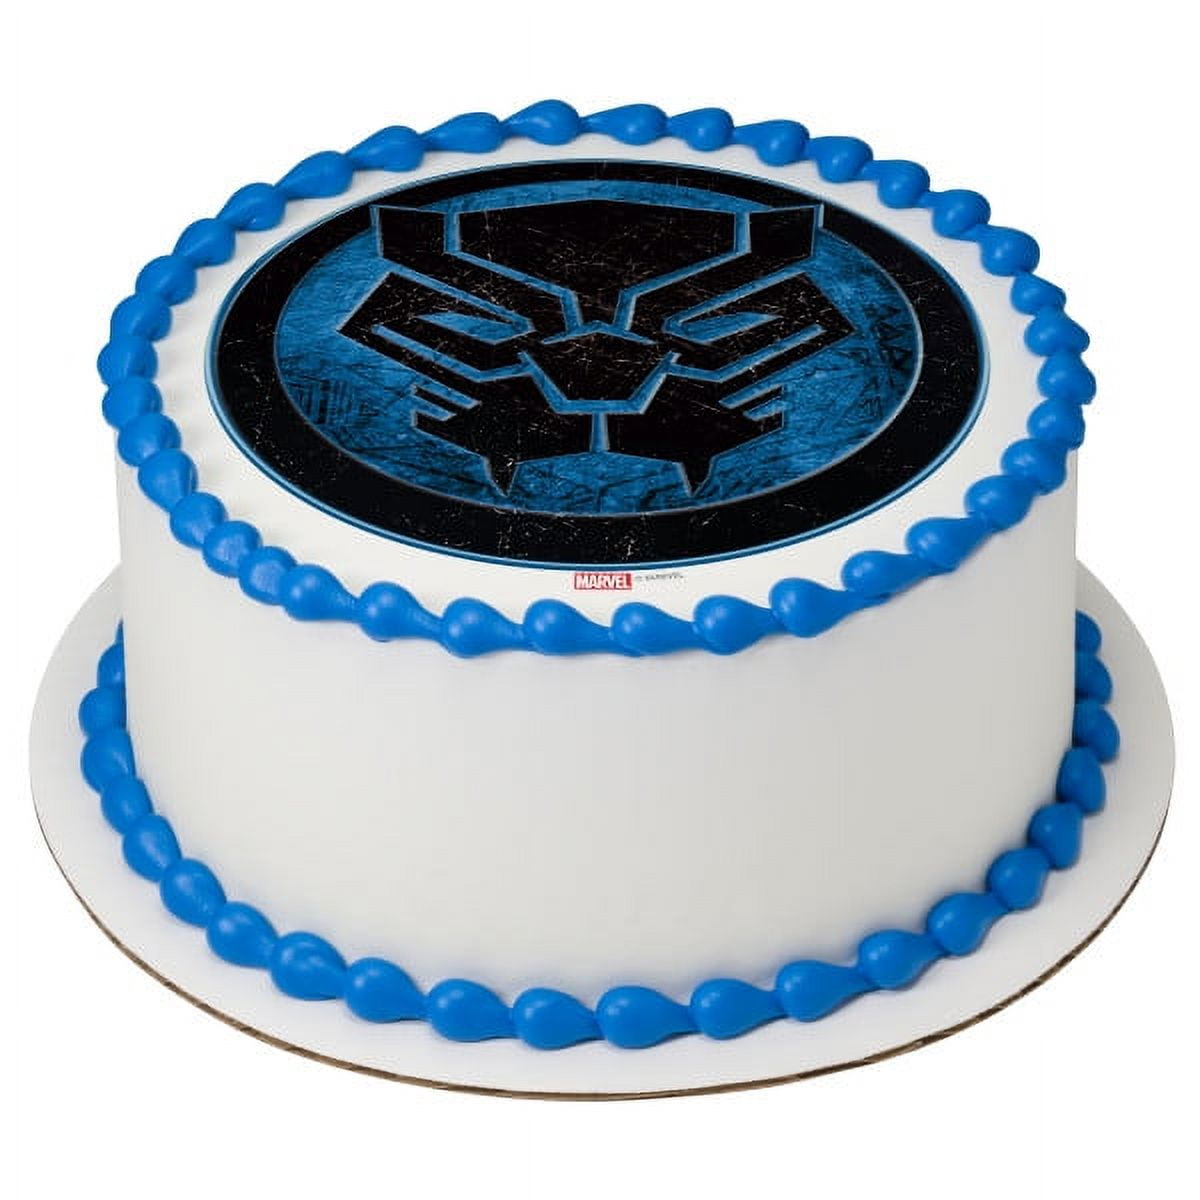 Black Panther Birthday Cake Ideas Images (Pictures)